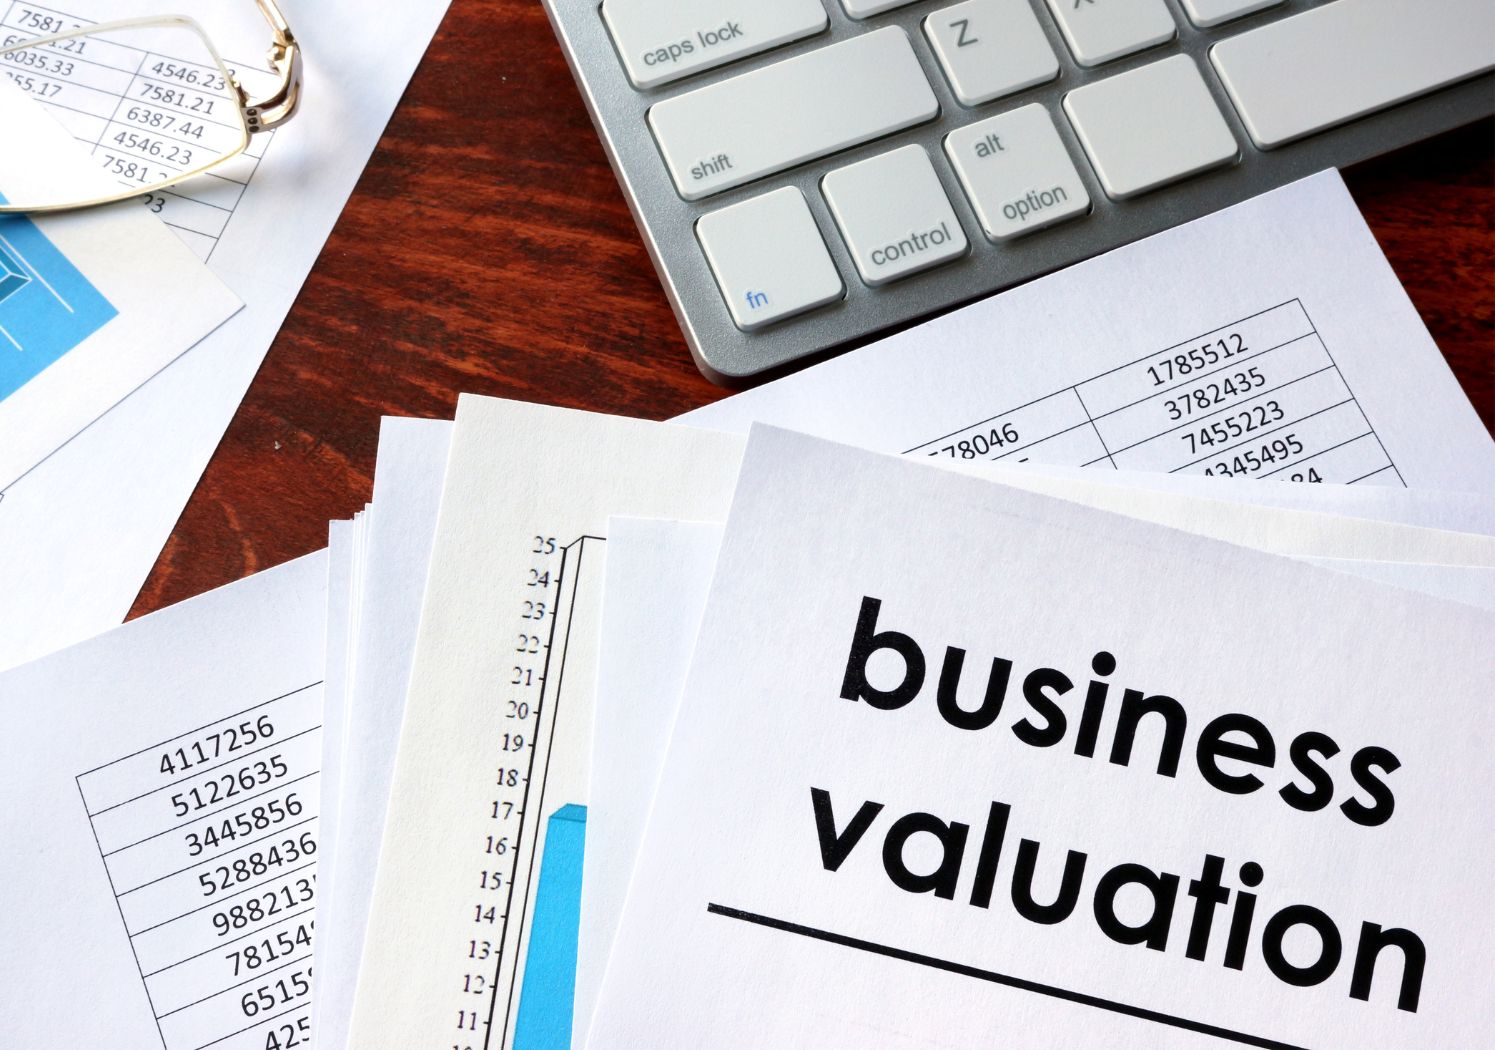 papers on desk with calculator for business valuation service